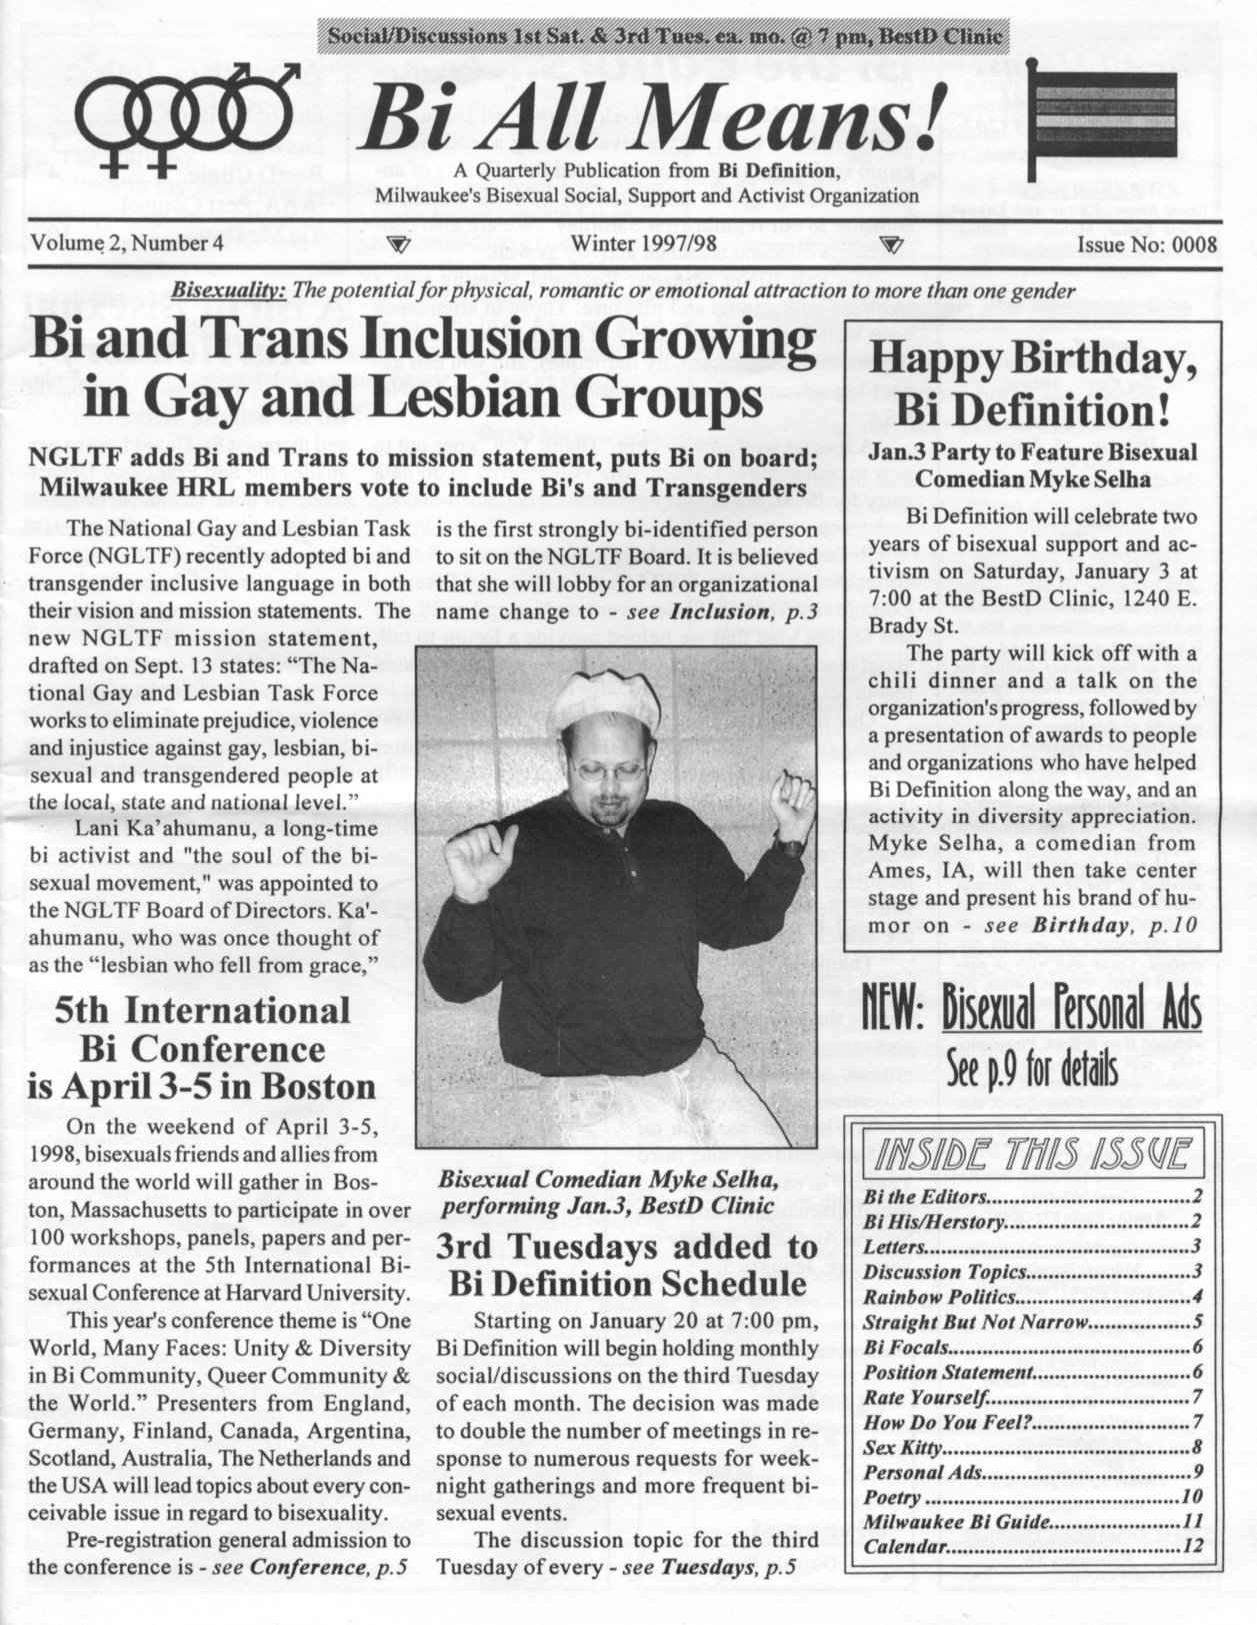 The front page of the Bi All Means! newsletter from Winter 1997/98 published by Bi Definition, a Milwaukee based bisexual support group active from the mid 1990s to the mid 2000s